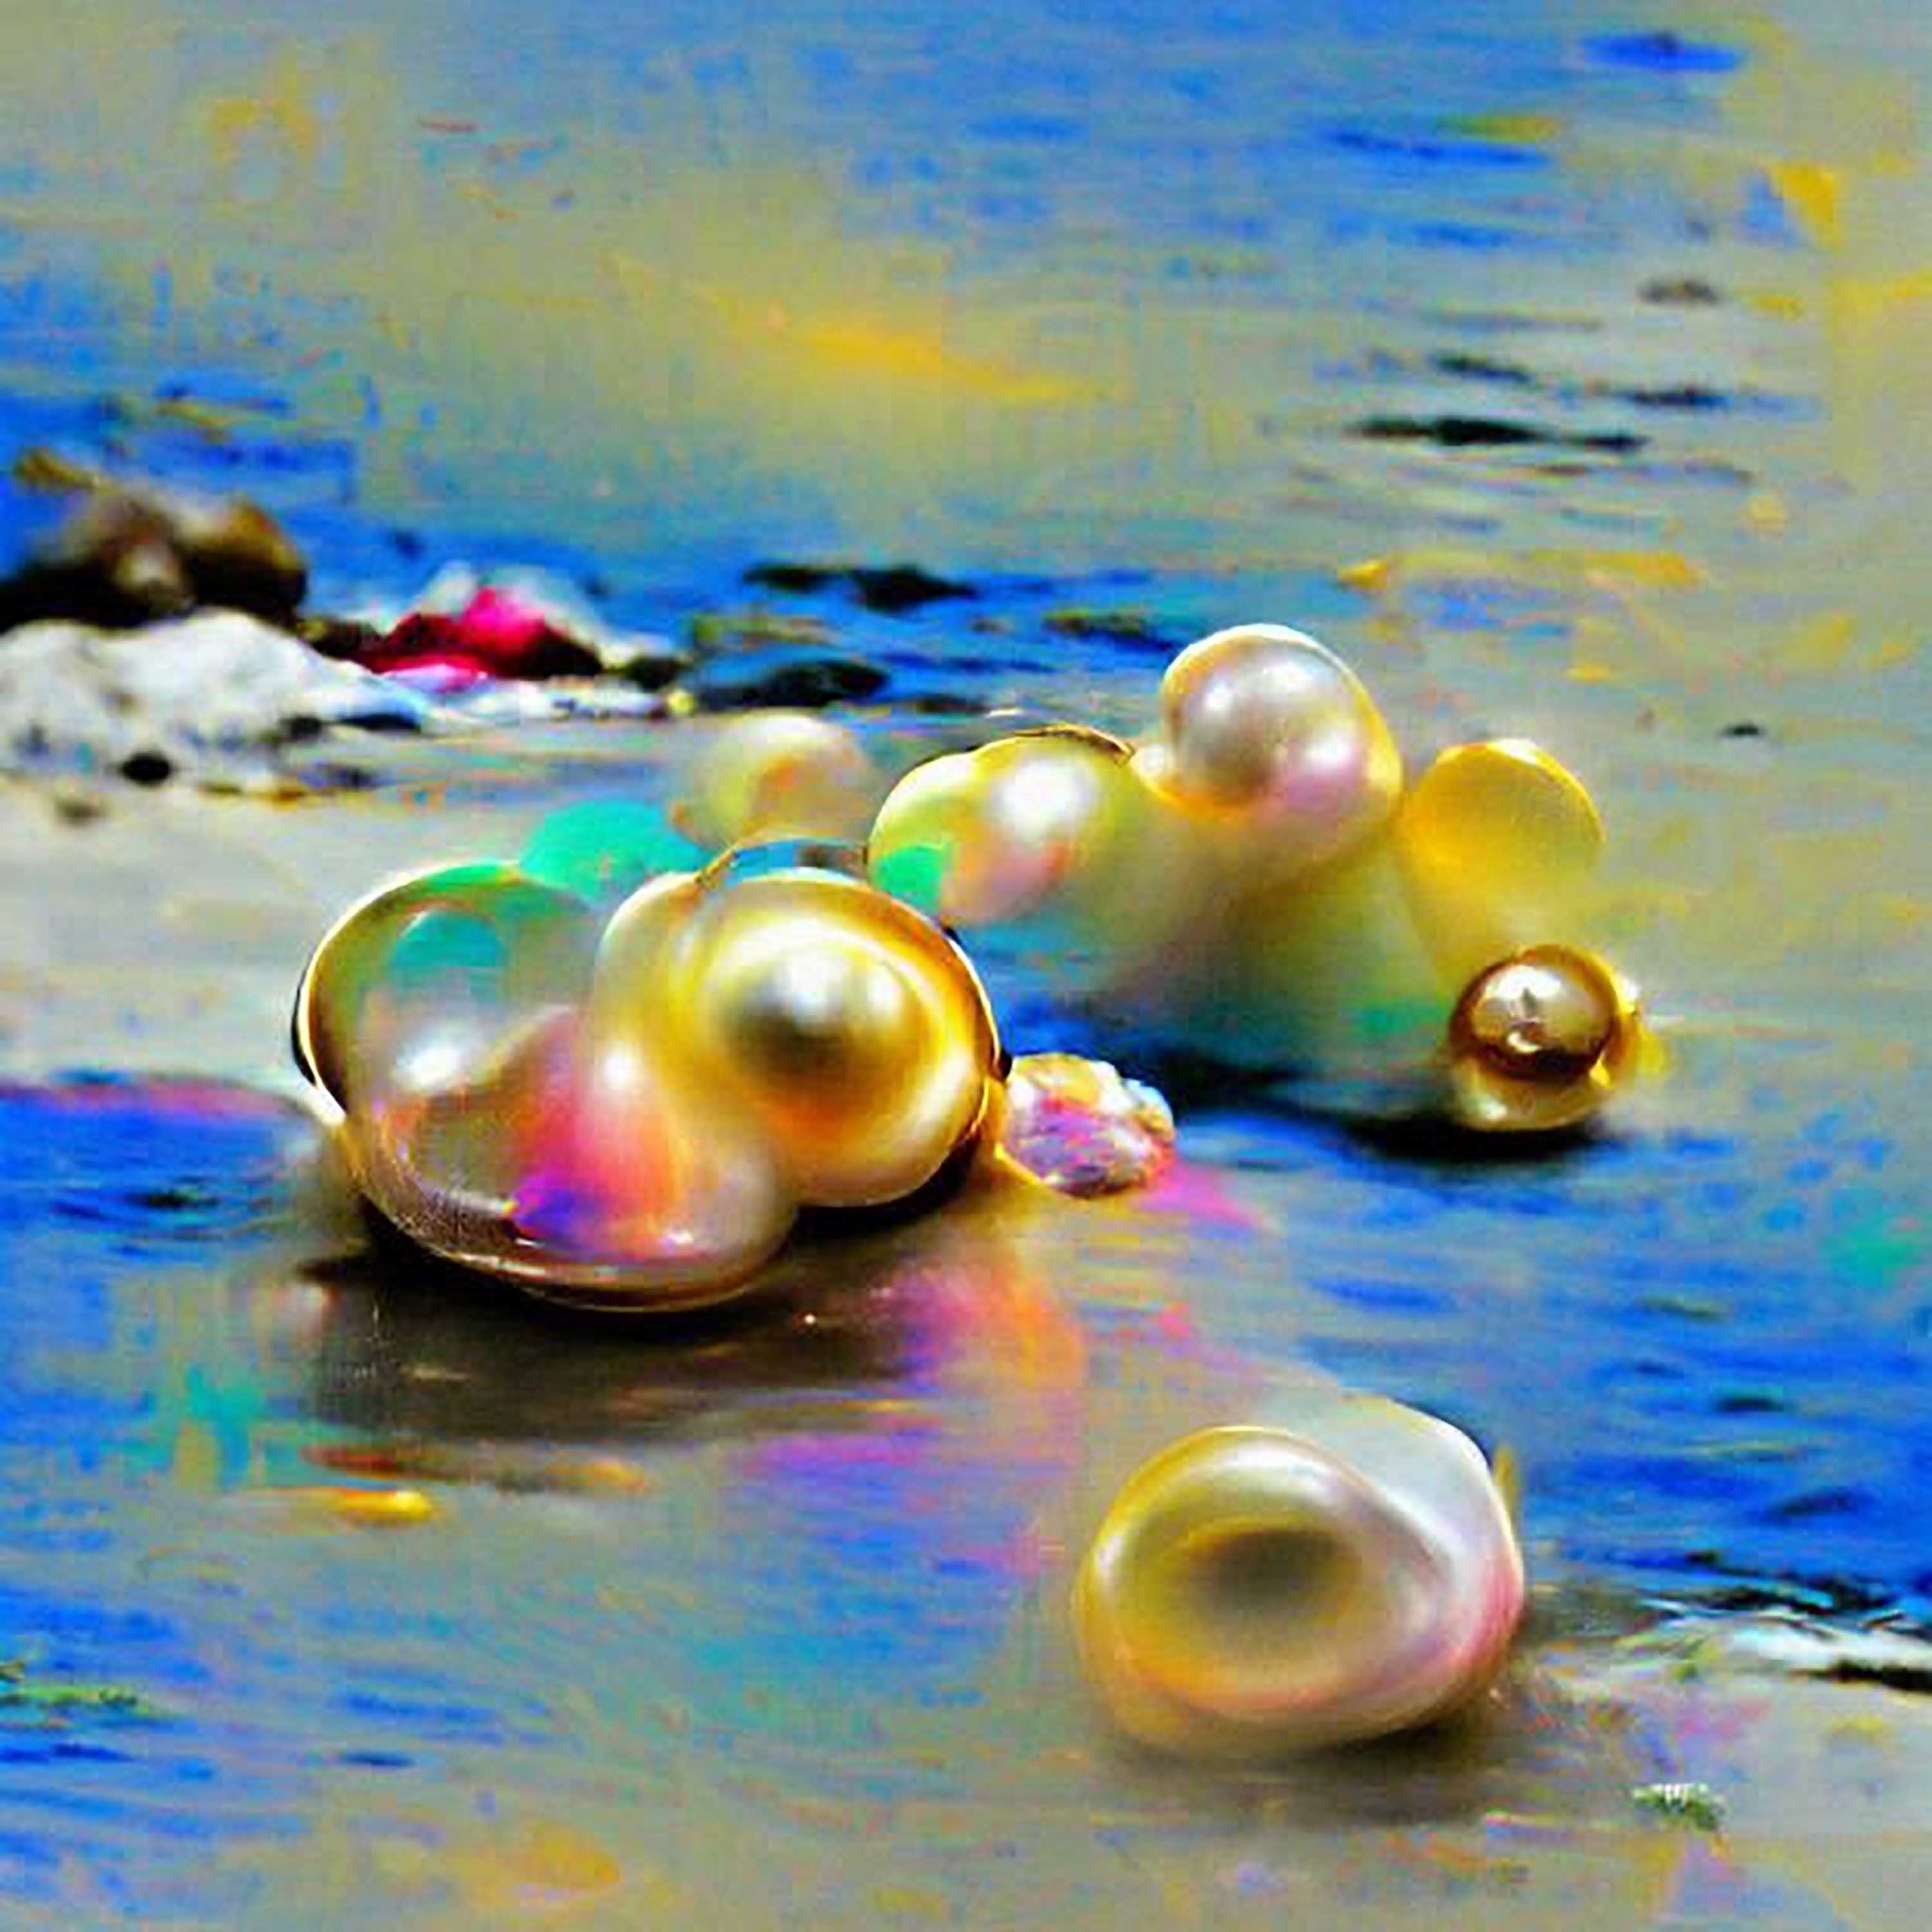 #103 - "the pearls have ways of reflecting every color, there are many other hues than humans know of, the Gold Rush is so hush hush that no one’s even looking here"